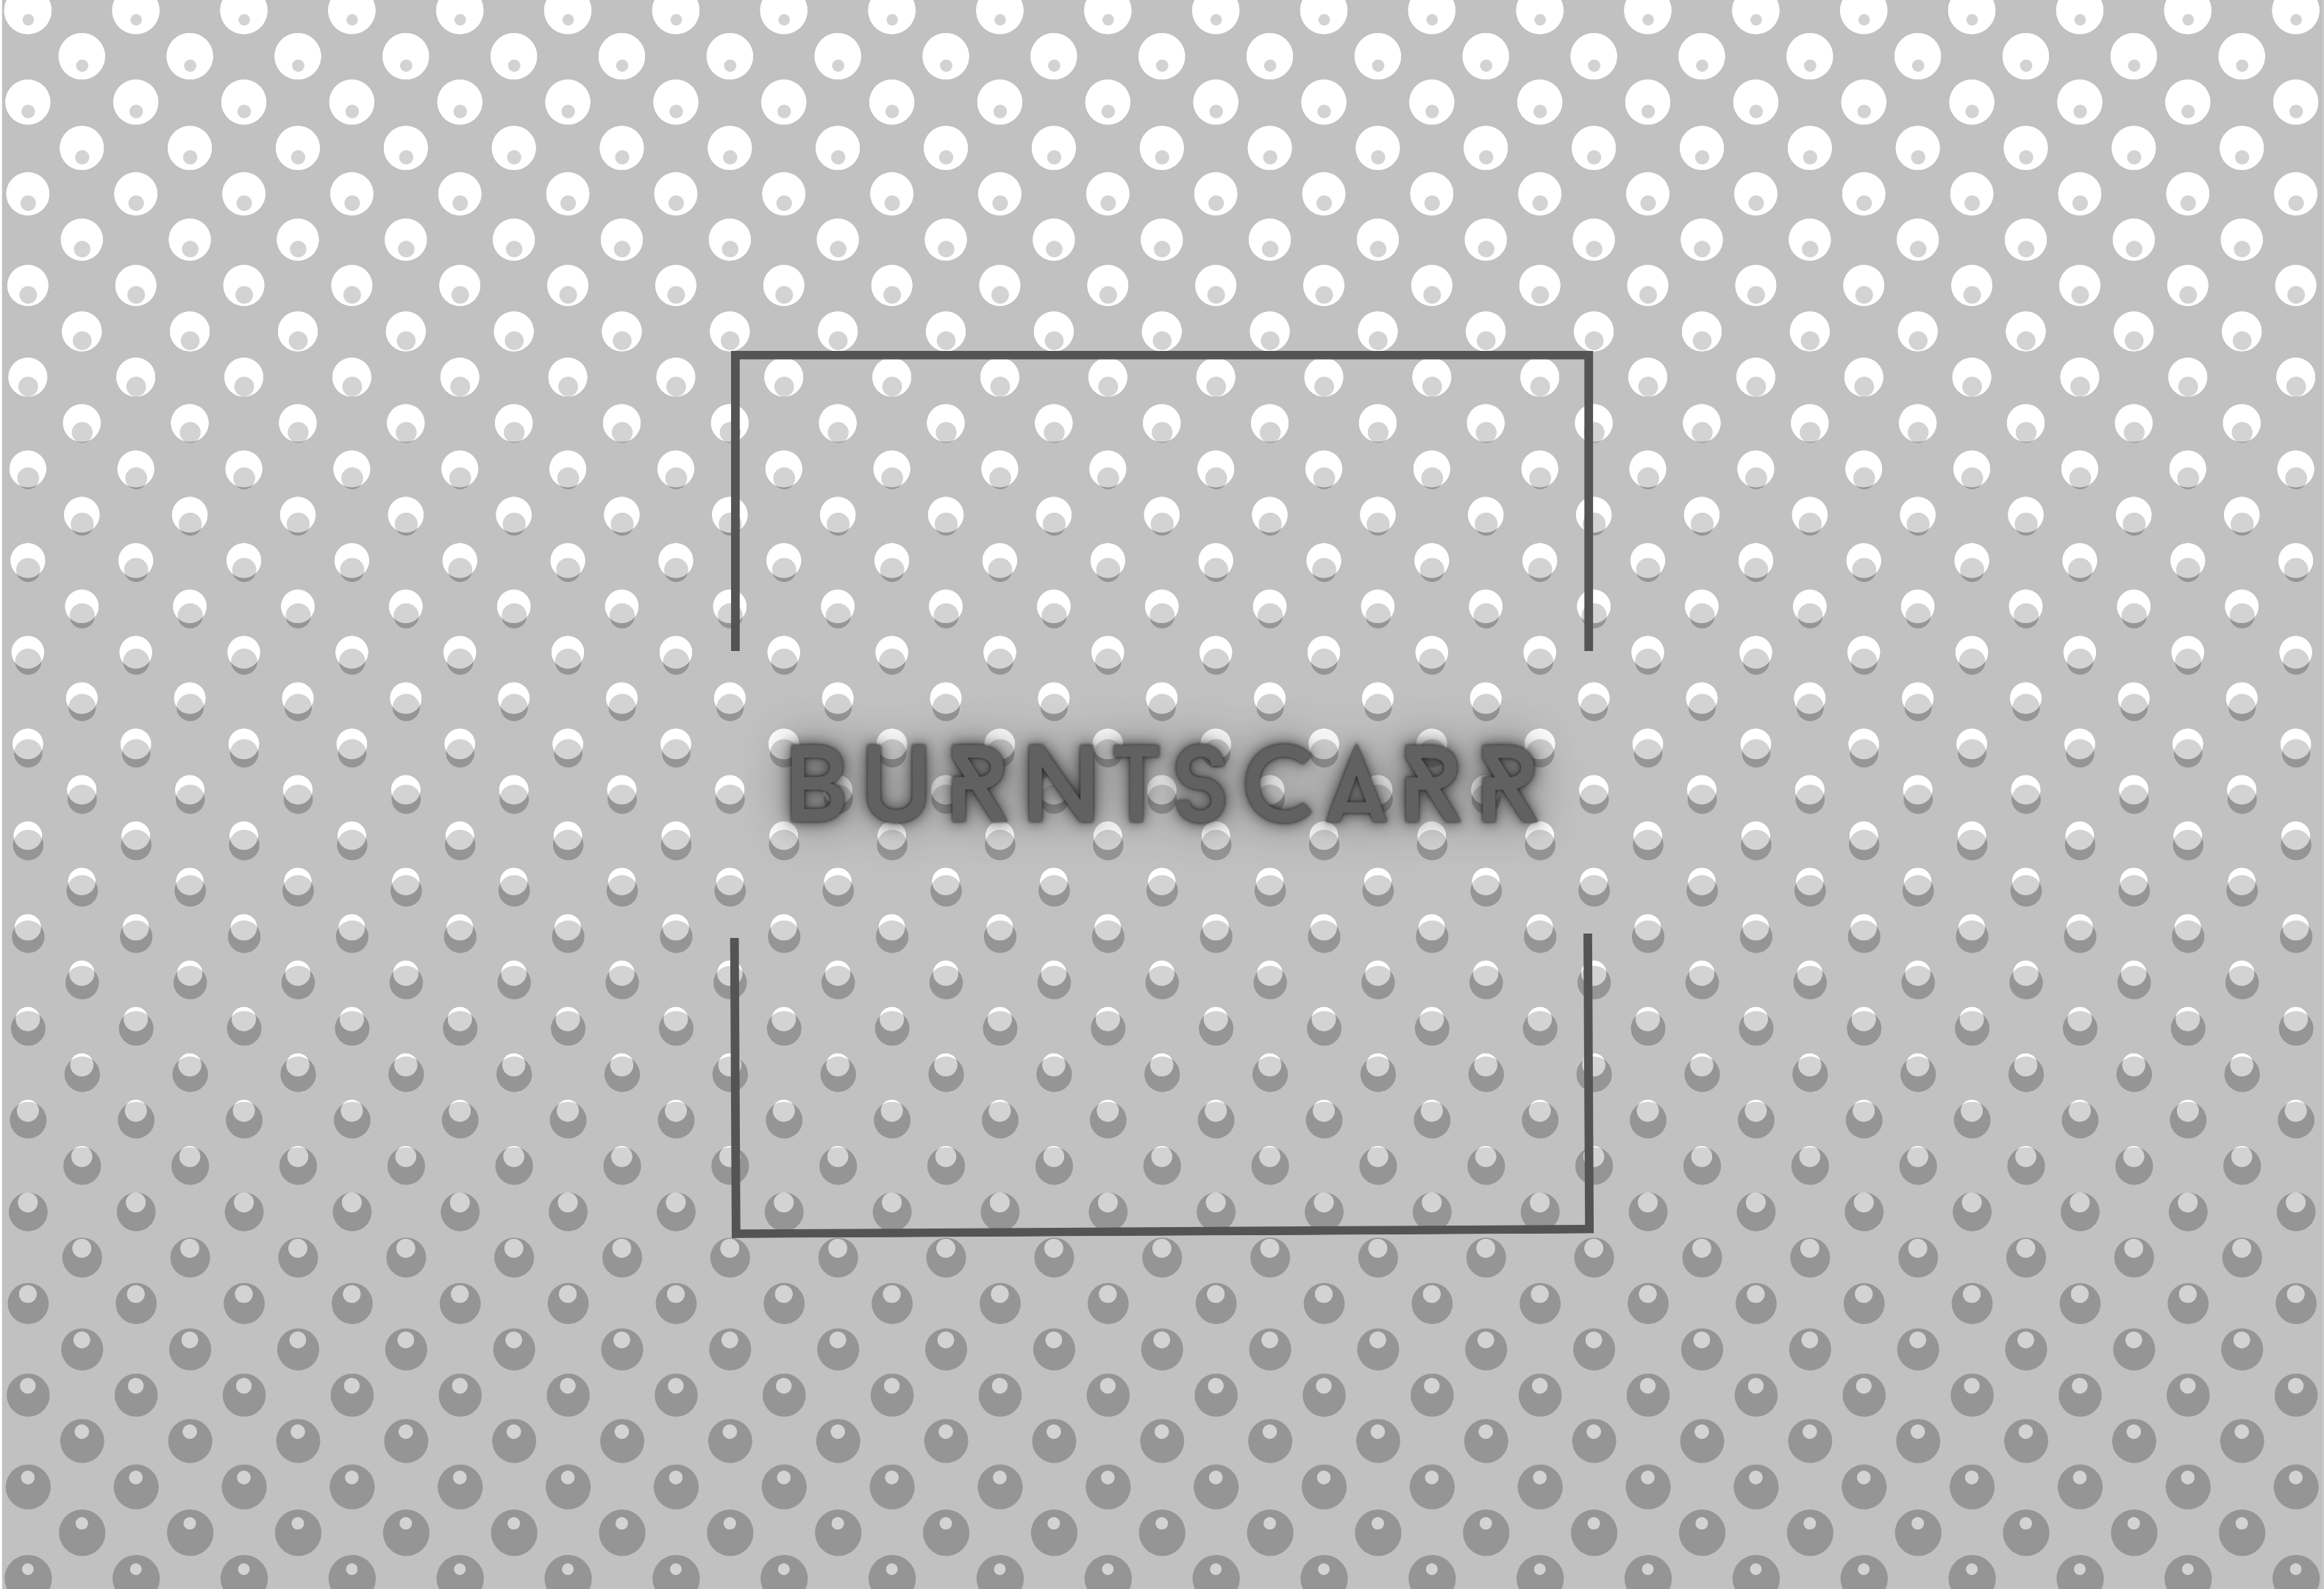 burntscarr - Feel The Search